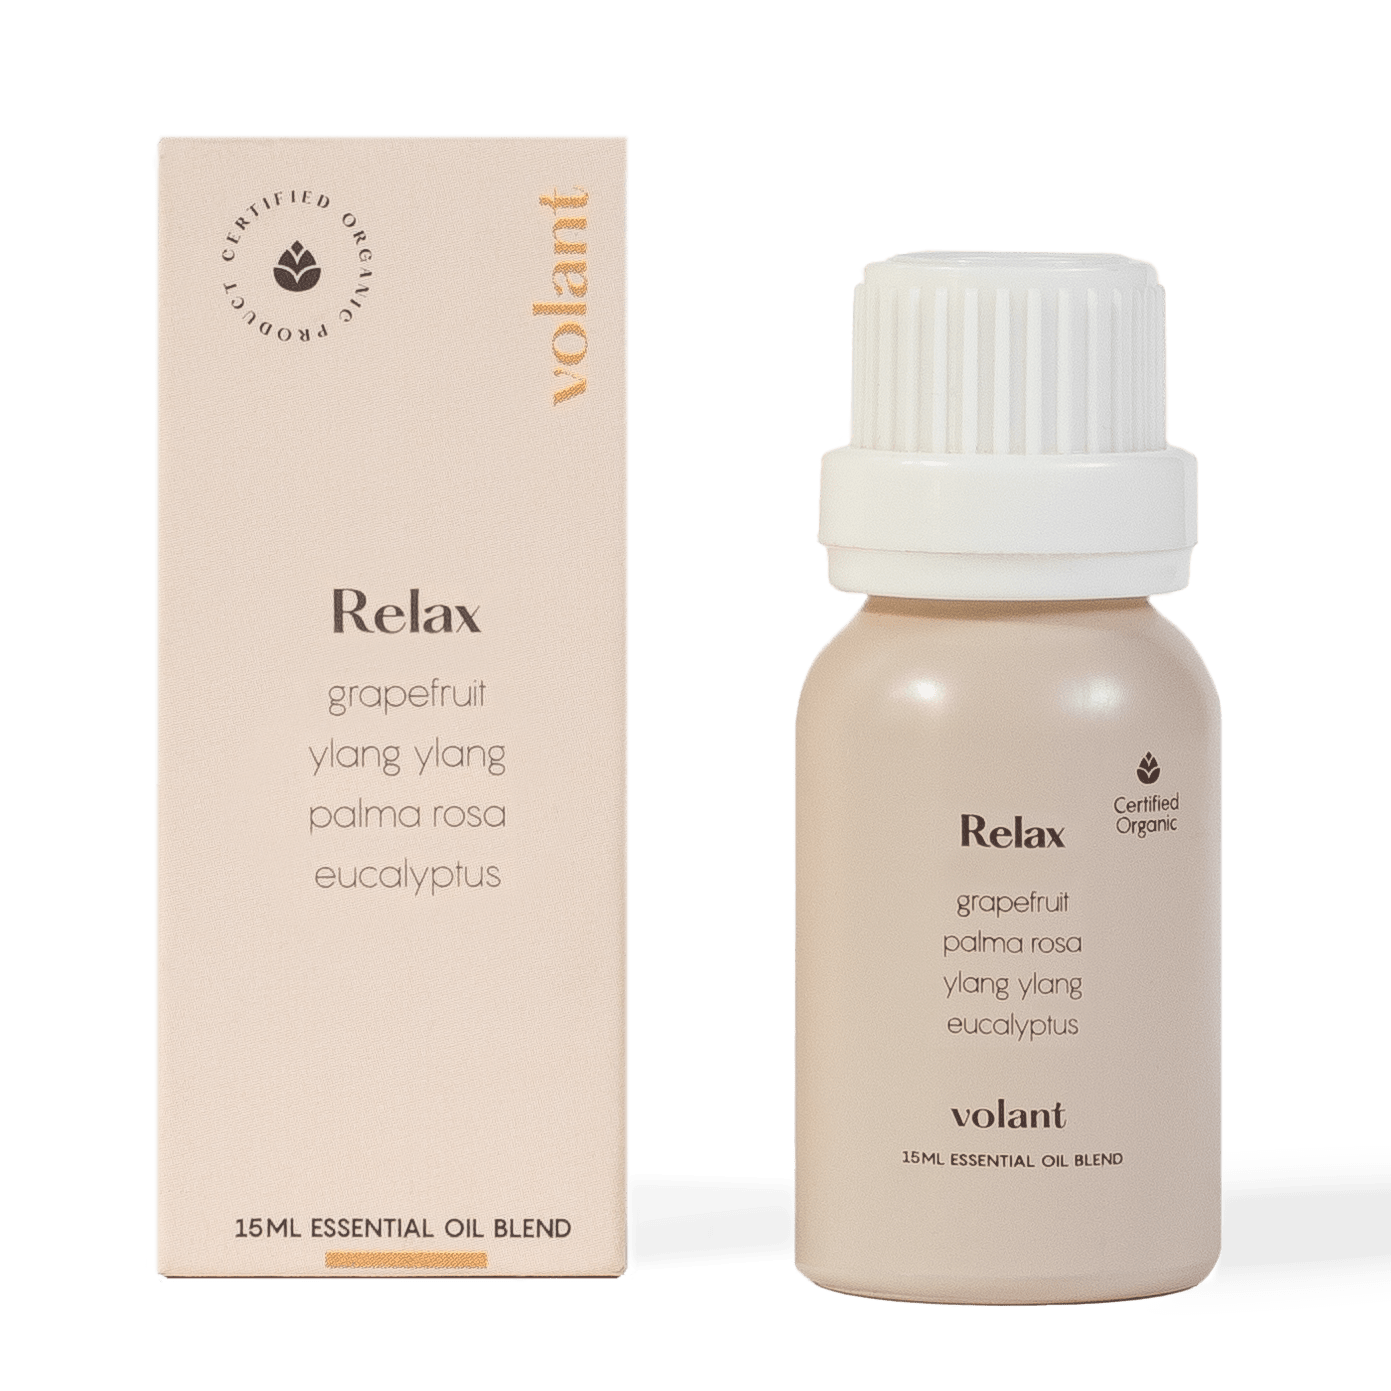 volant relax essential oil blend bottle packaging made of pure Palma Rosa, Ylang Ylang, Eucalyptus, and Grapefruit